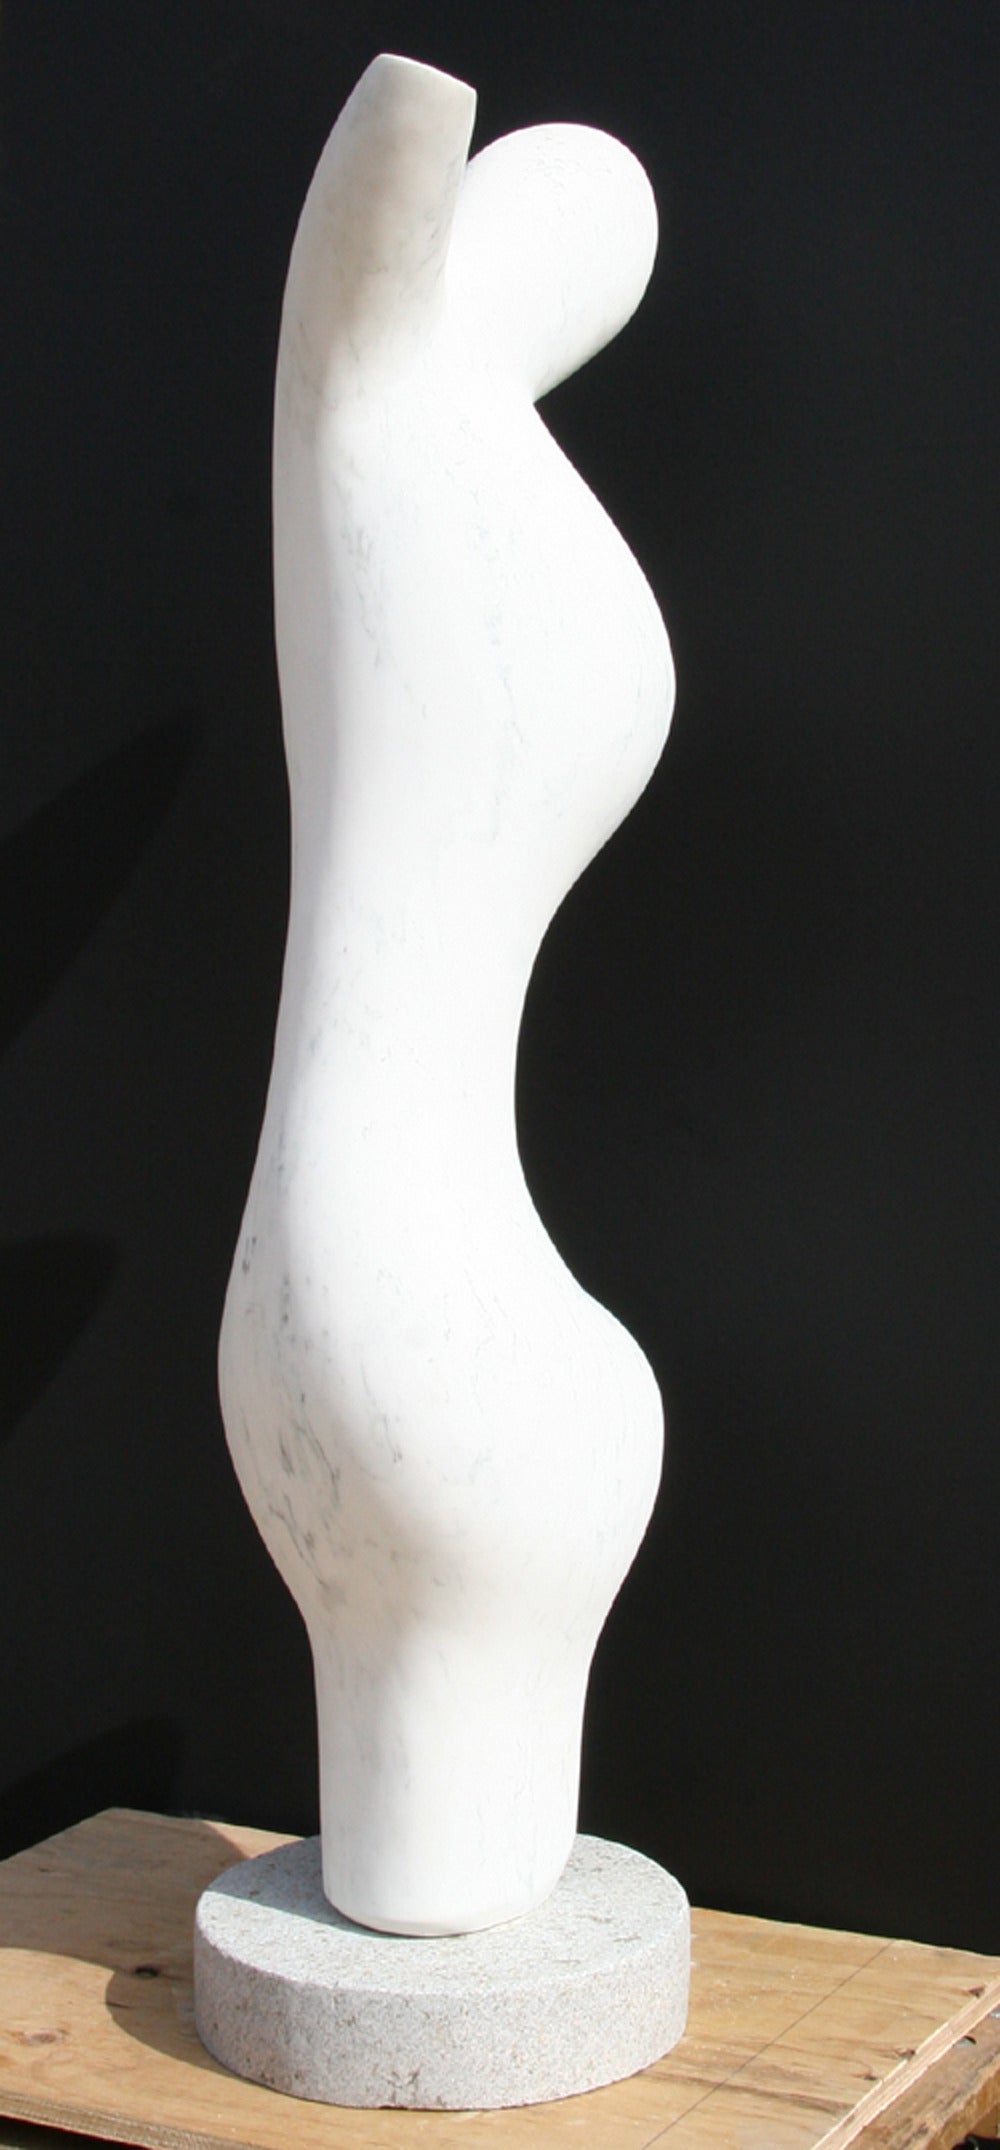 A white marble sculpture by Mario DeNoto. An modern abstract figure of subtly human like features and slight gray veining. 
 
Artist: Mario DeNoto
Title:	Abstract Figure
Medium:	White Marble Sculpture on a Granite Base
Size: 46 x14 x 10 inches